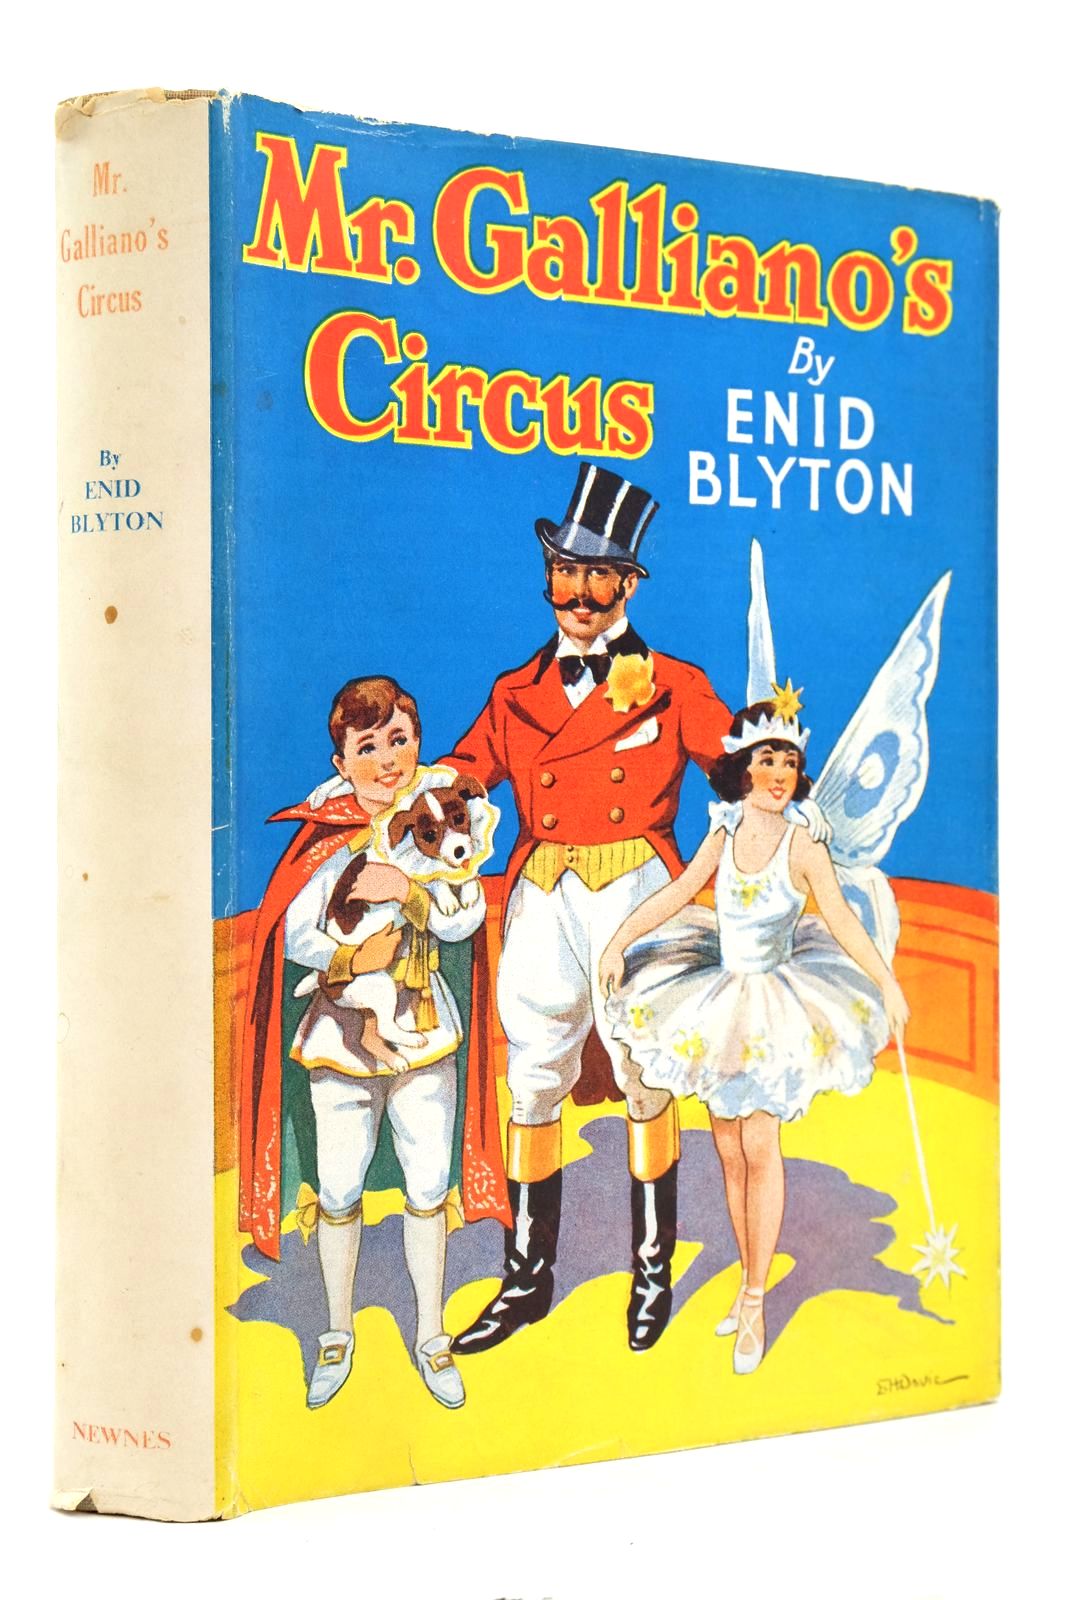 Photo of MR. GALLIANO'S CIRCUS written by Blyton, Enid illustrated by Davie, E.H. published by George Newnes Ltd. (STOCK CODE: 2139778)  for sale by Stella & Rose's Books